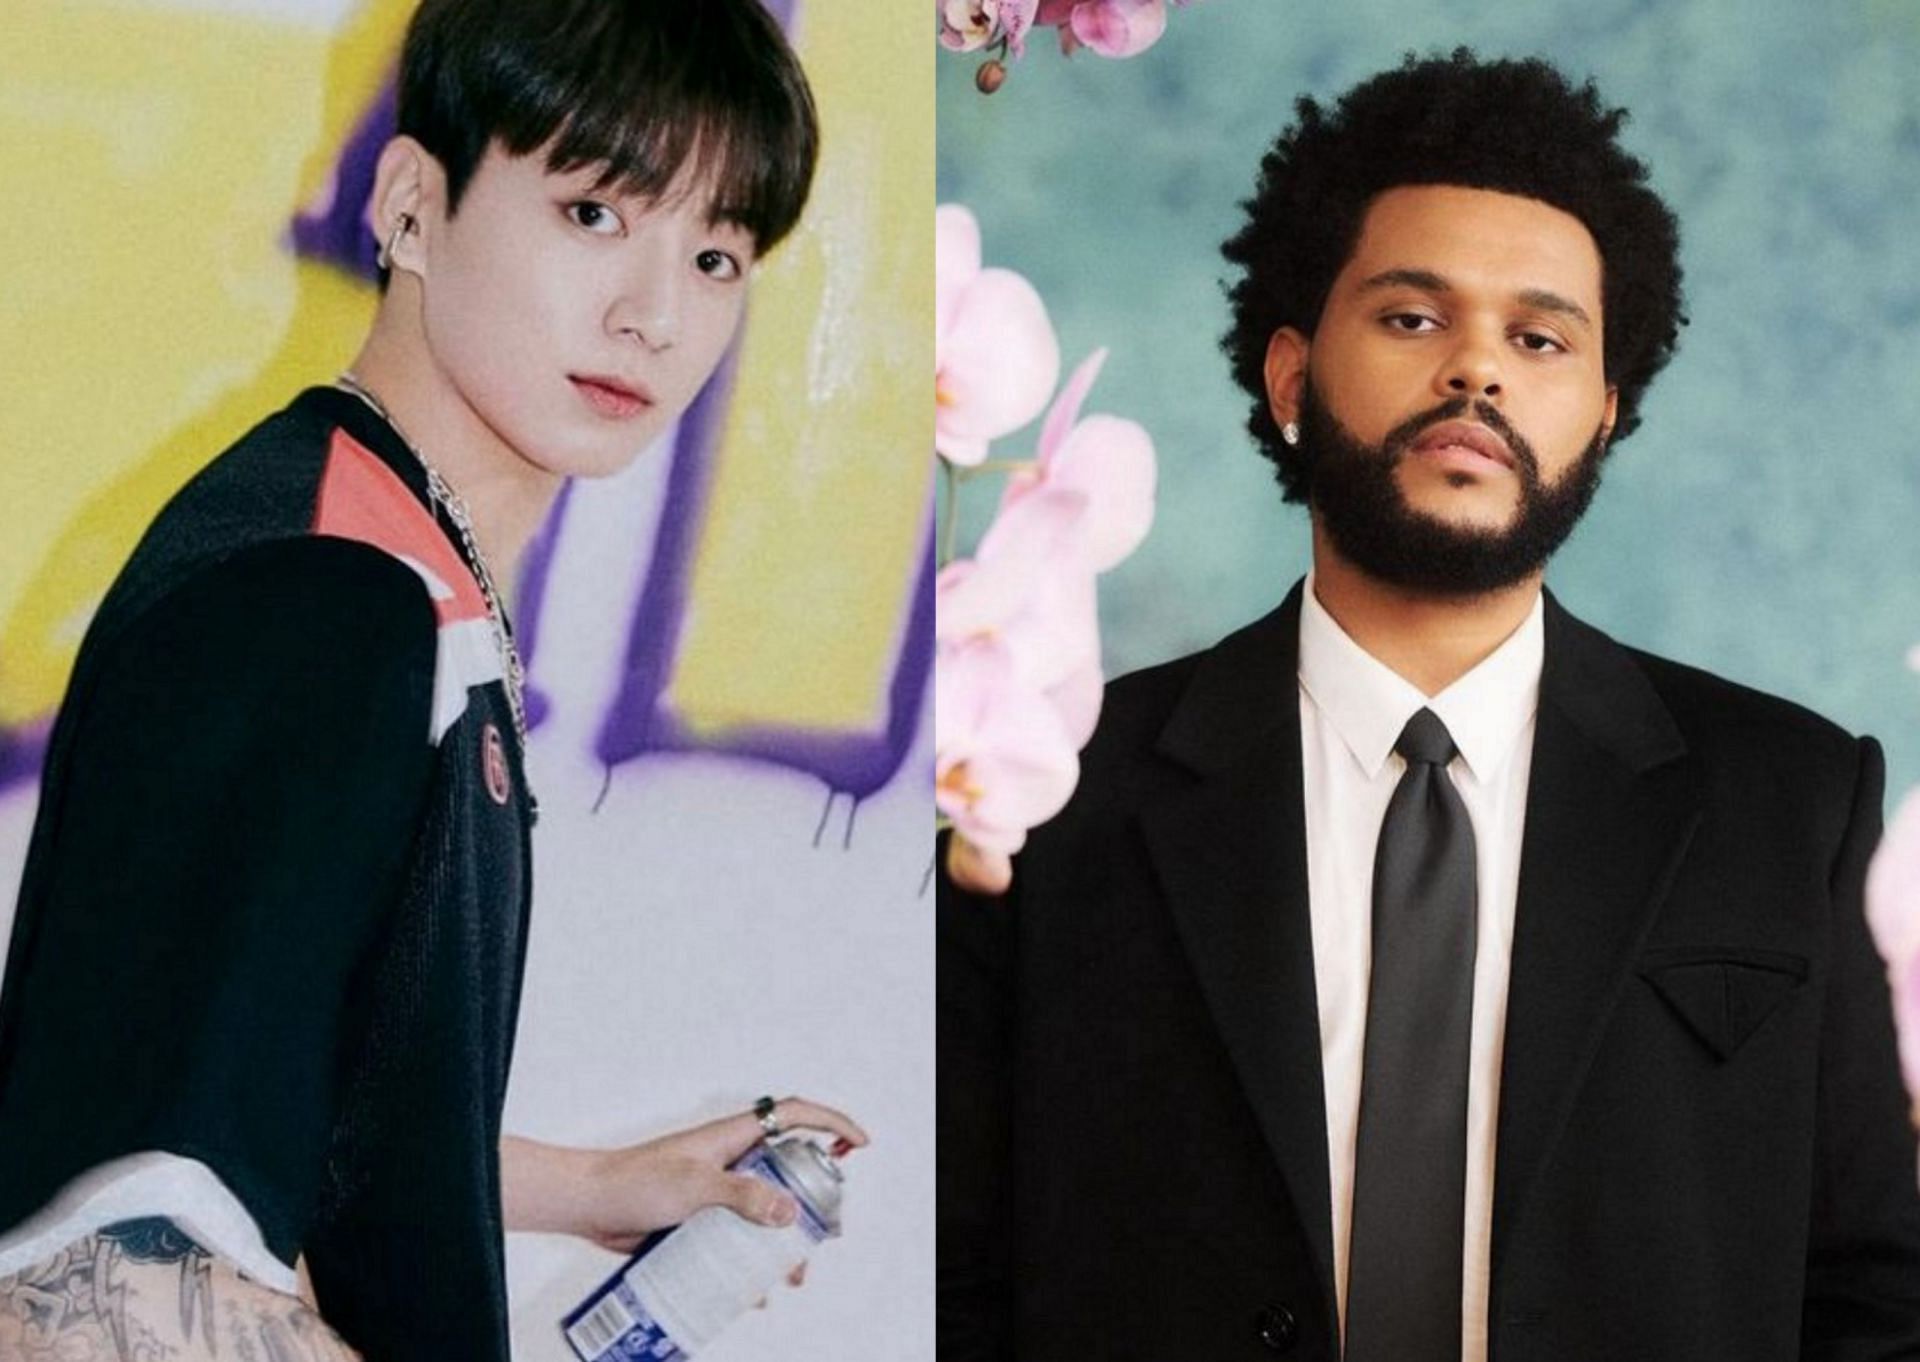 K-pop idol Jungkook (left) and American singer The Weeknd (right) (Image via Instagram/@theweeknd/@jungkook_bighitentertainment)